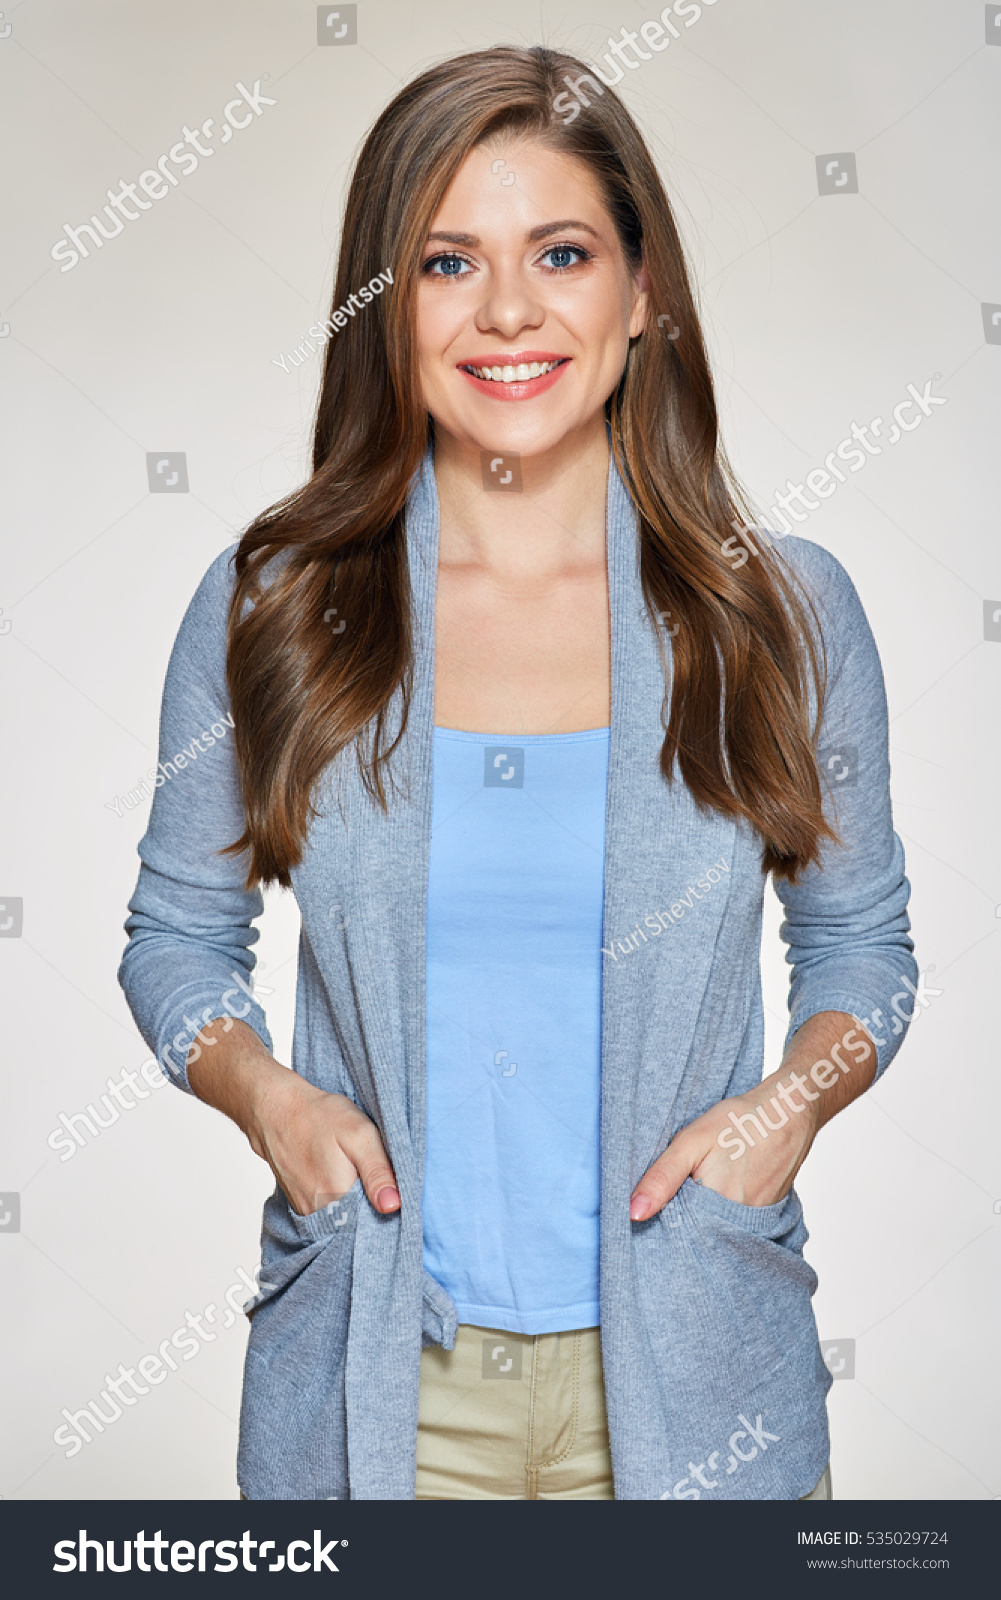 Isolated Portrait Young Smiling Casual Dressed Stock Photo (Edit Now ...